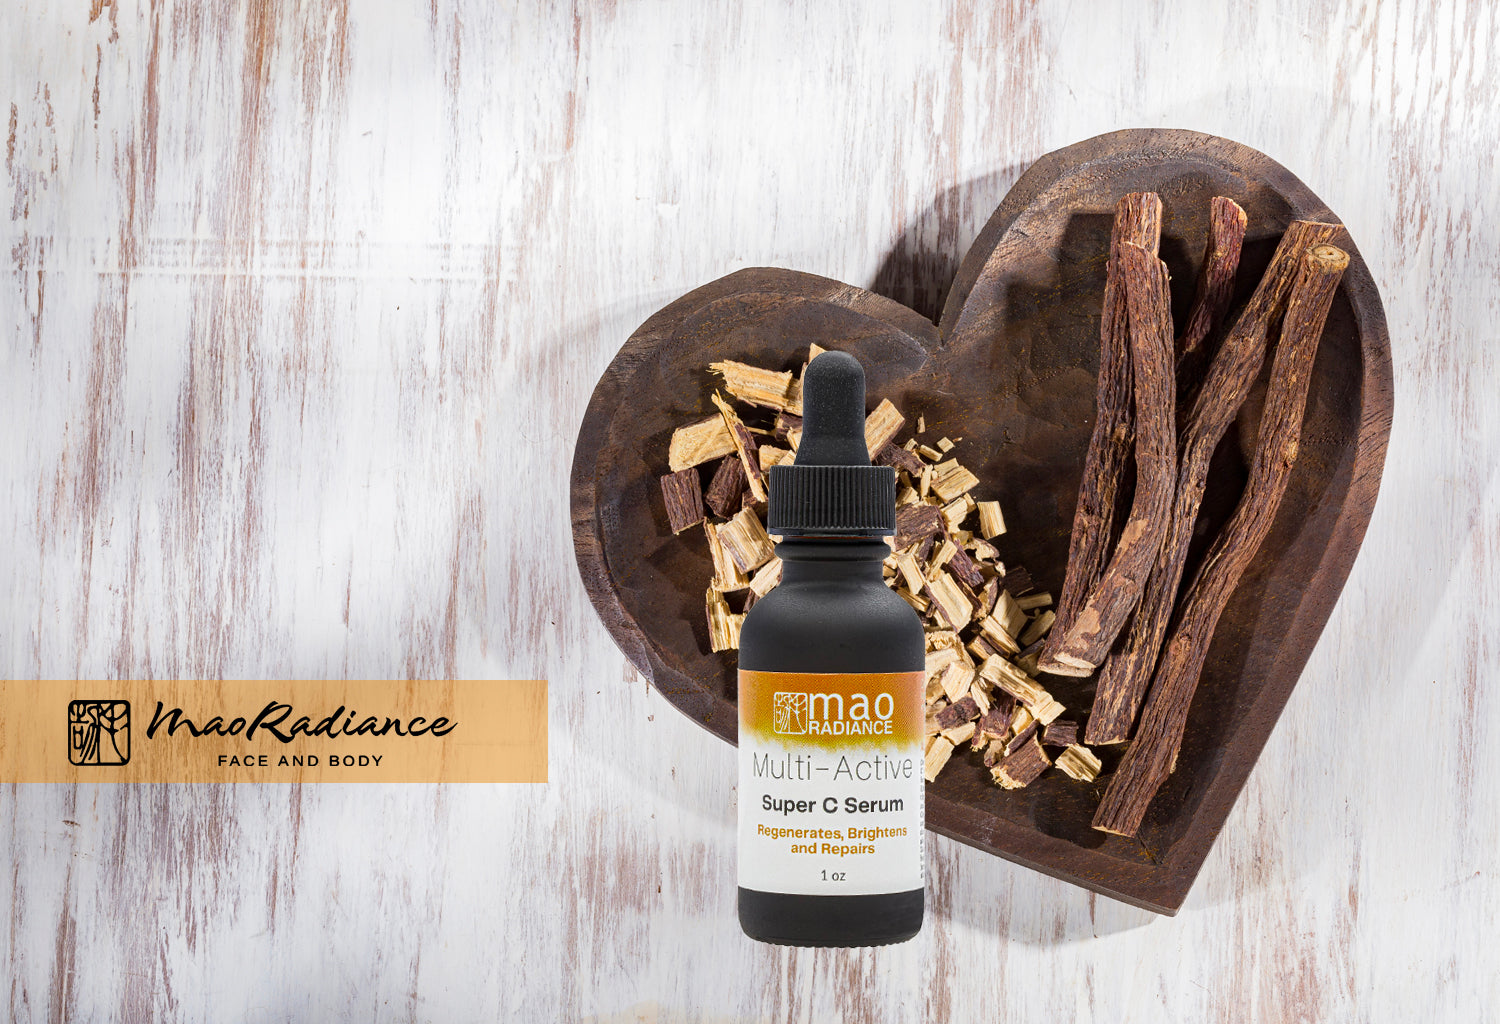 What are Some Unique Licorice Root Skincare Benefits?